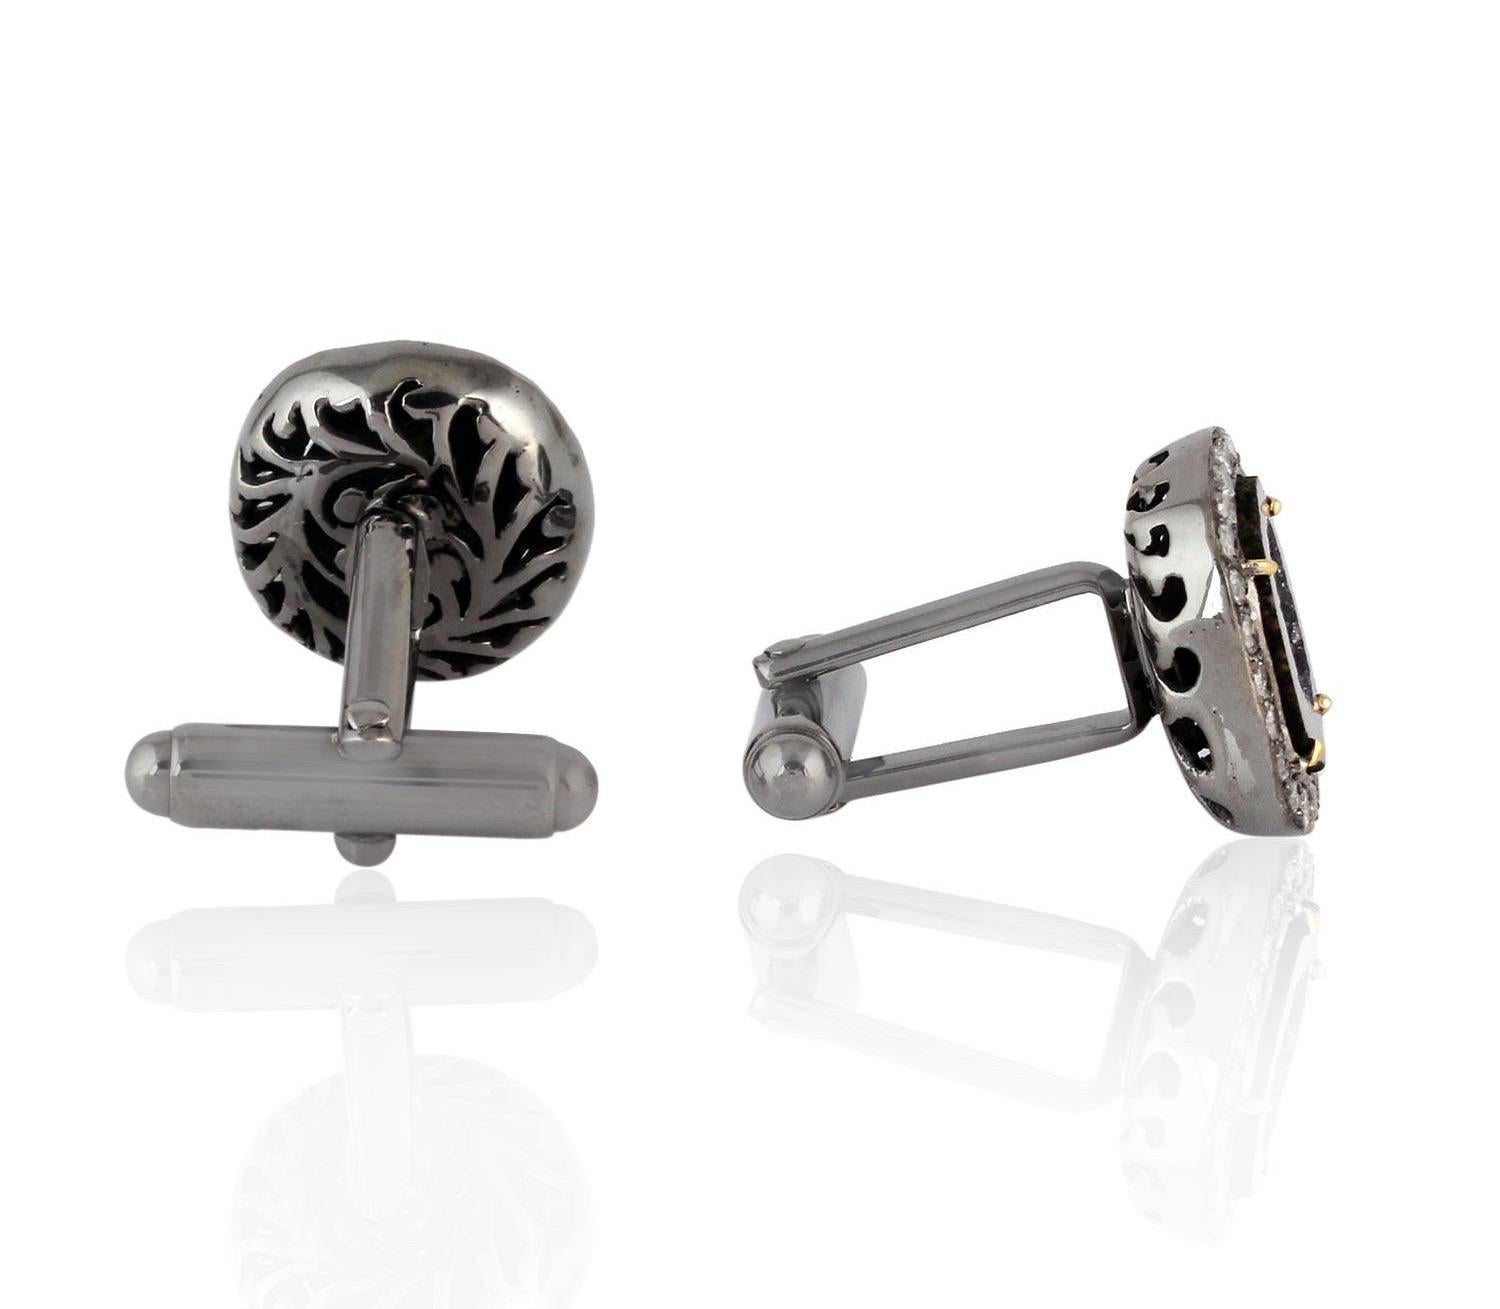 Cast from 18-karat gold and sterling silver, these cuff links are hand set with 8.56 carats geode and .89 carats of pave diamonds in blackened finish.

FOLLOW  MEGHNA JEWELS storefront to view the latest collection & exclusive pieces.  Meghna Jewels